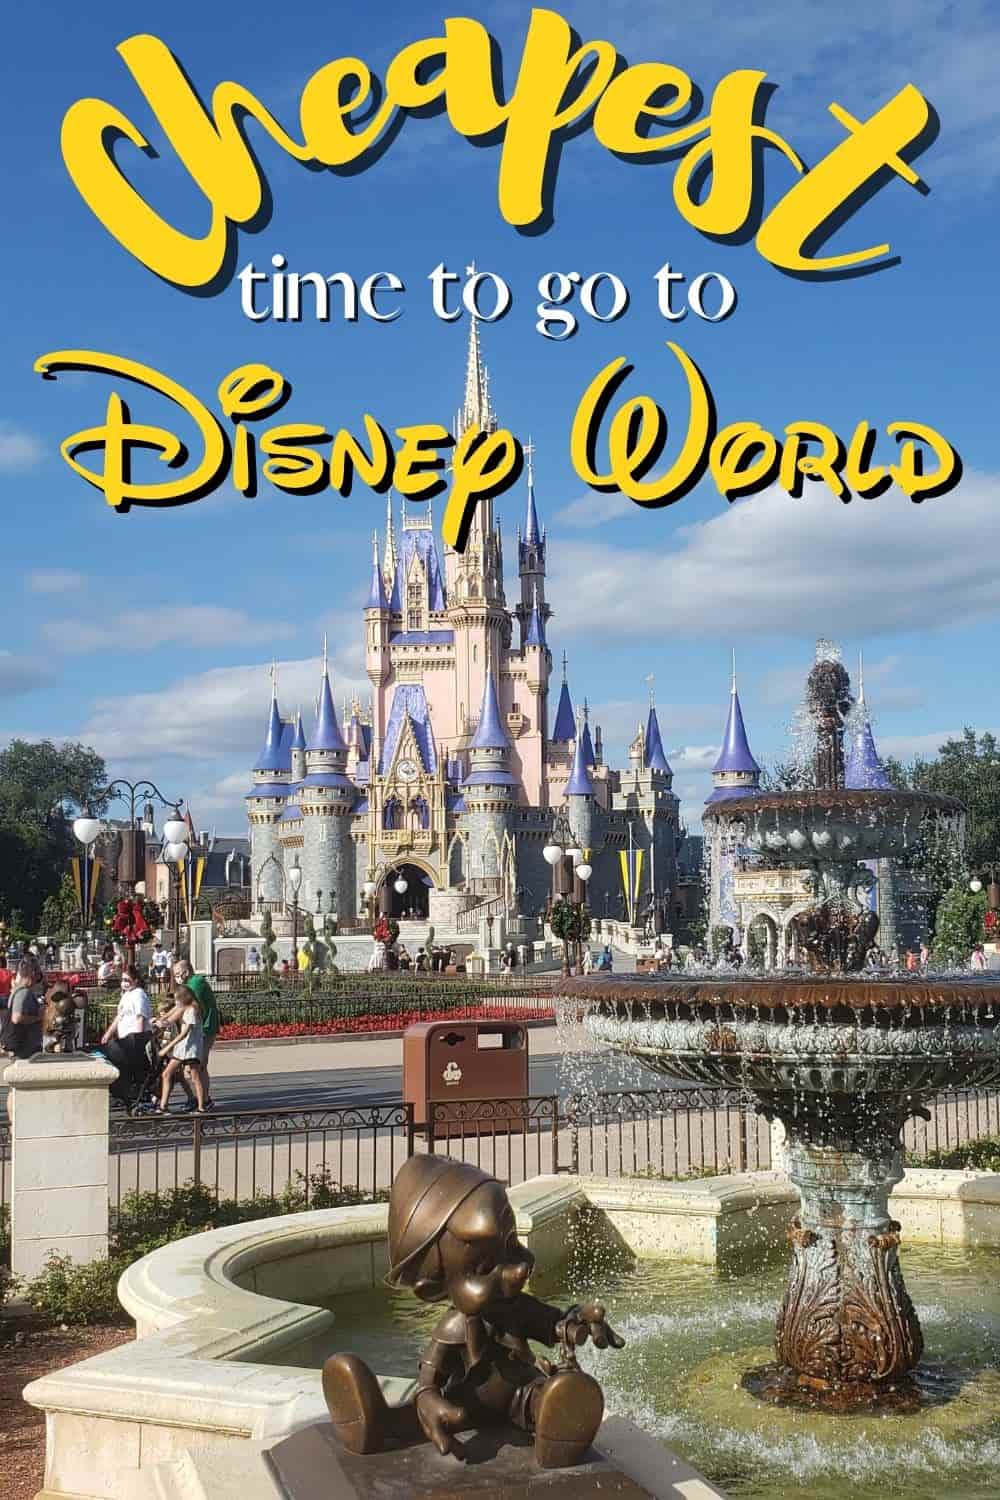 When is the Cheapest Time to go to Disney World?